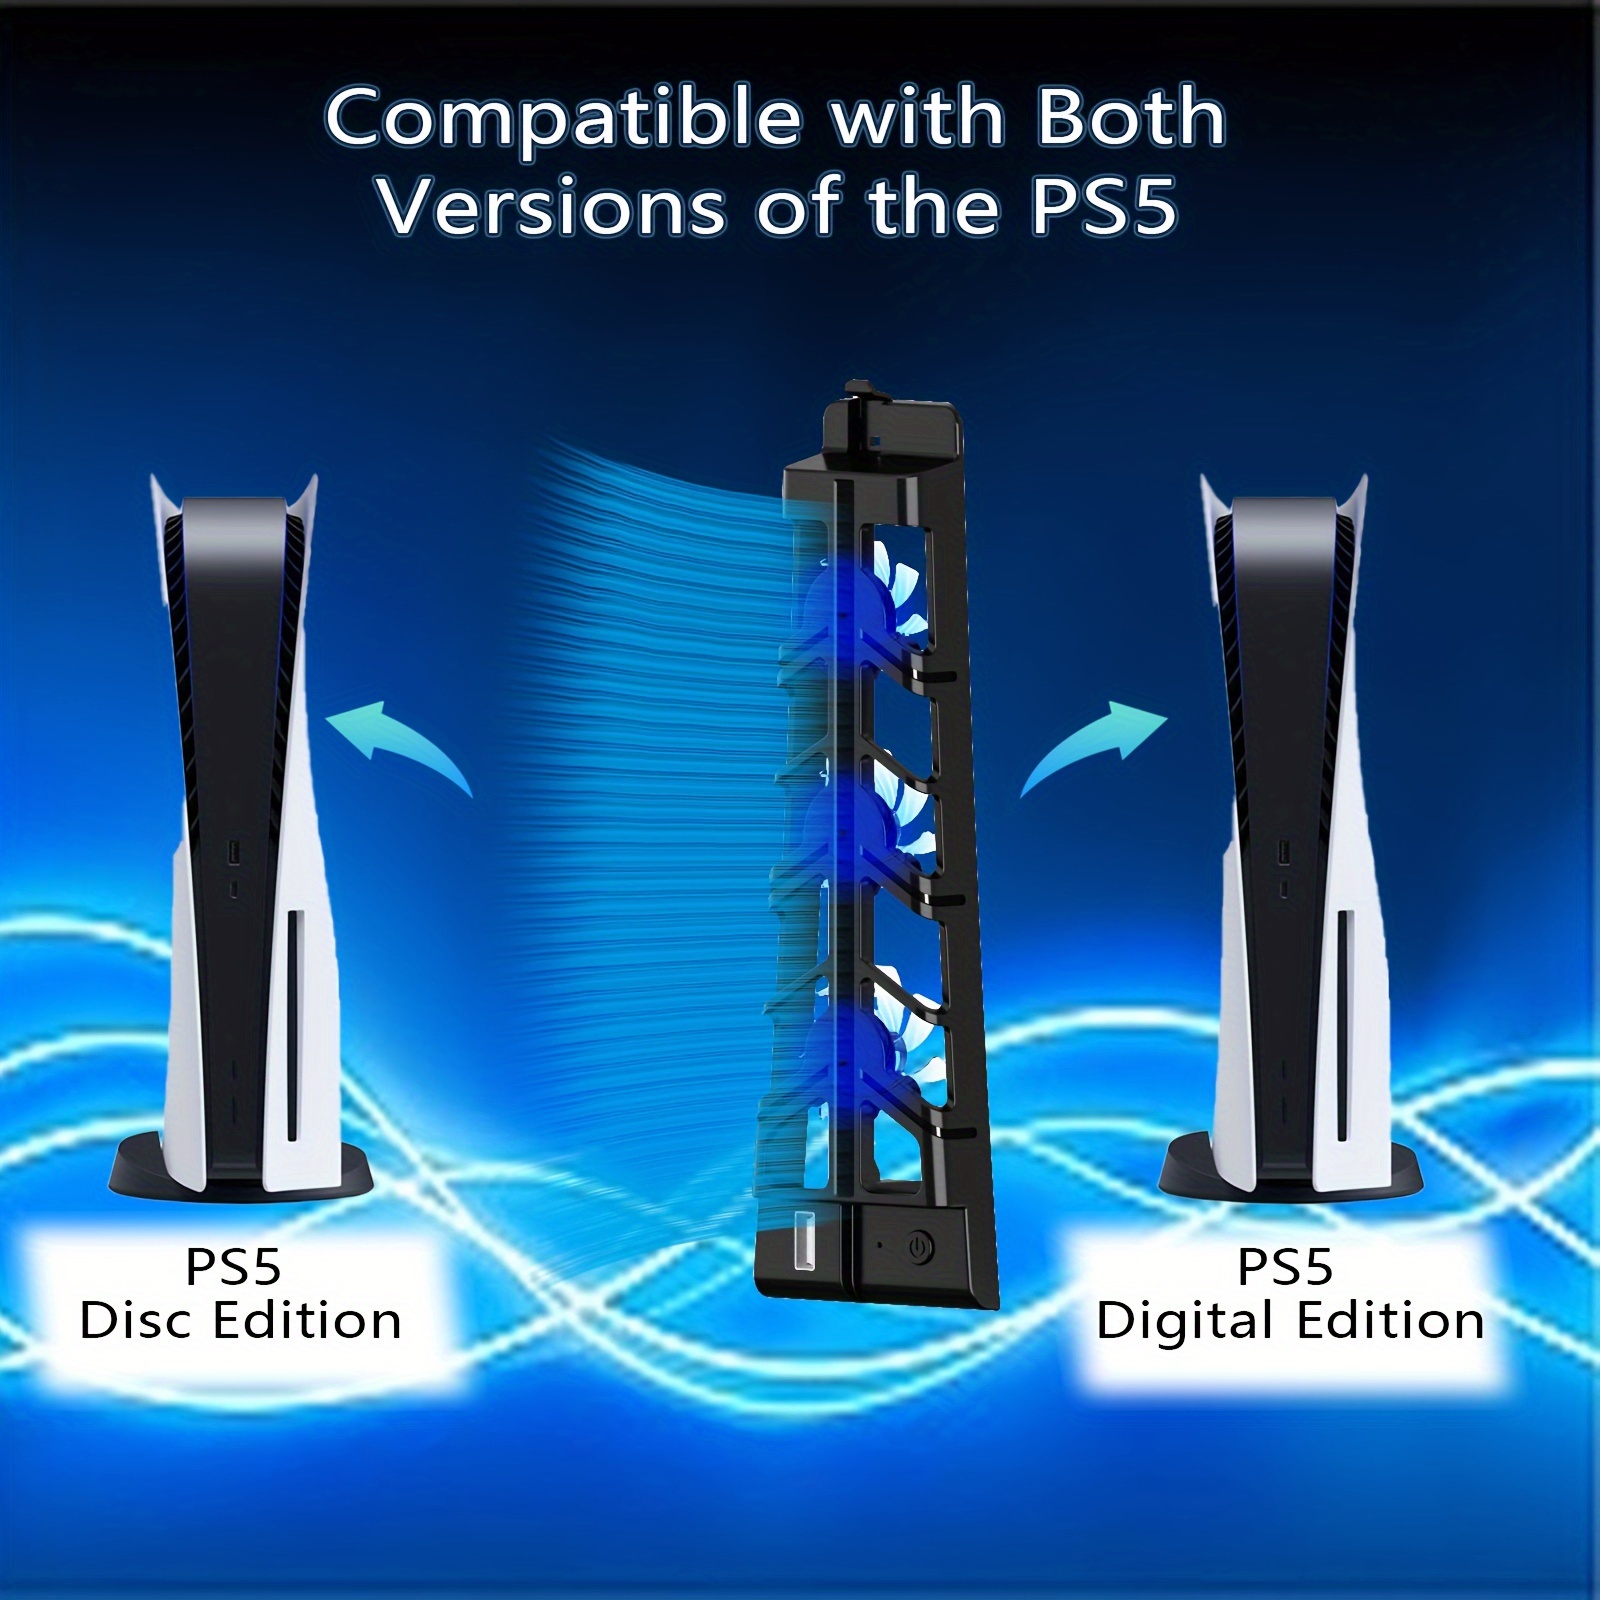 Suitable For Ps5 Slim Host Cooling Fan Ps5 Slim Game - Temu